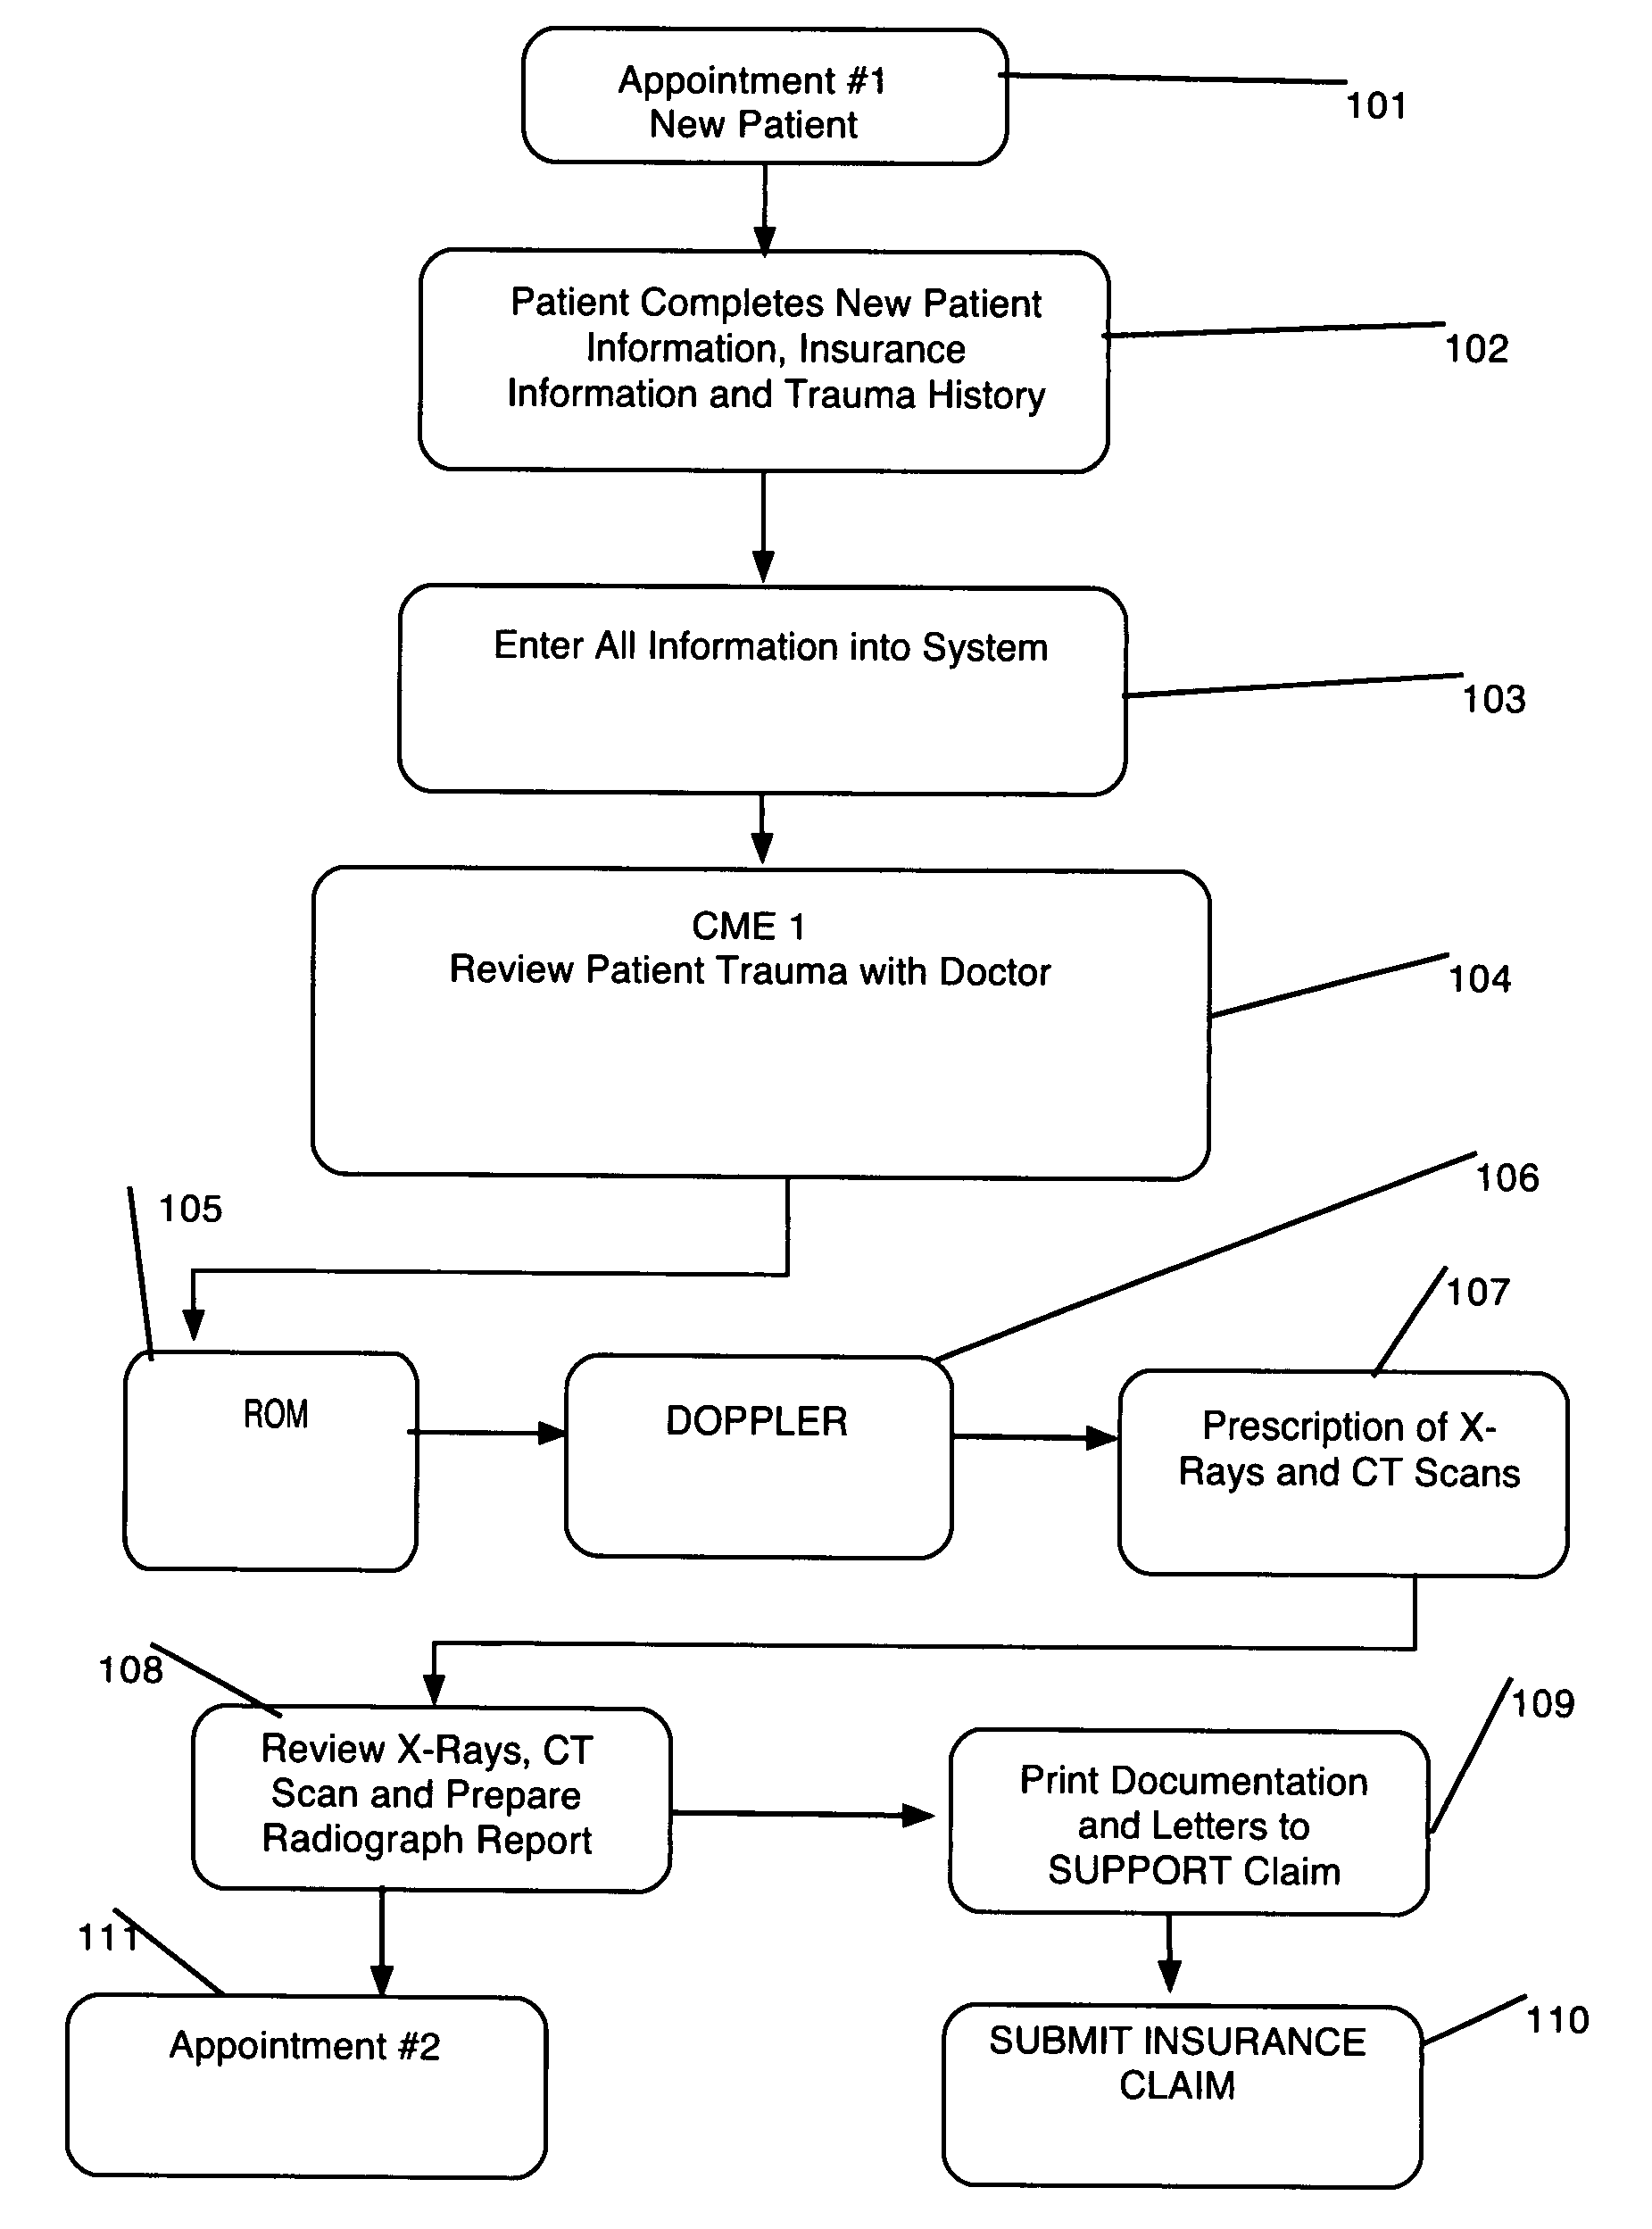 System and method of treating Tempro Mandibular Disorders utilizing a protocol of examinations, diagnostics, procedures and treatments to generate letters, reports and coded insurance claim forms to maximize benefit payments